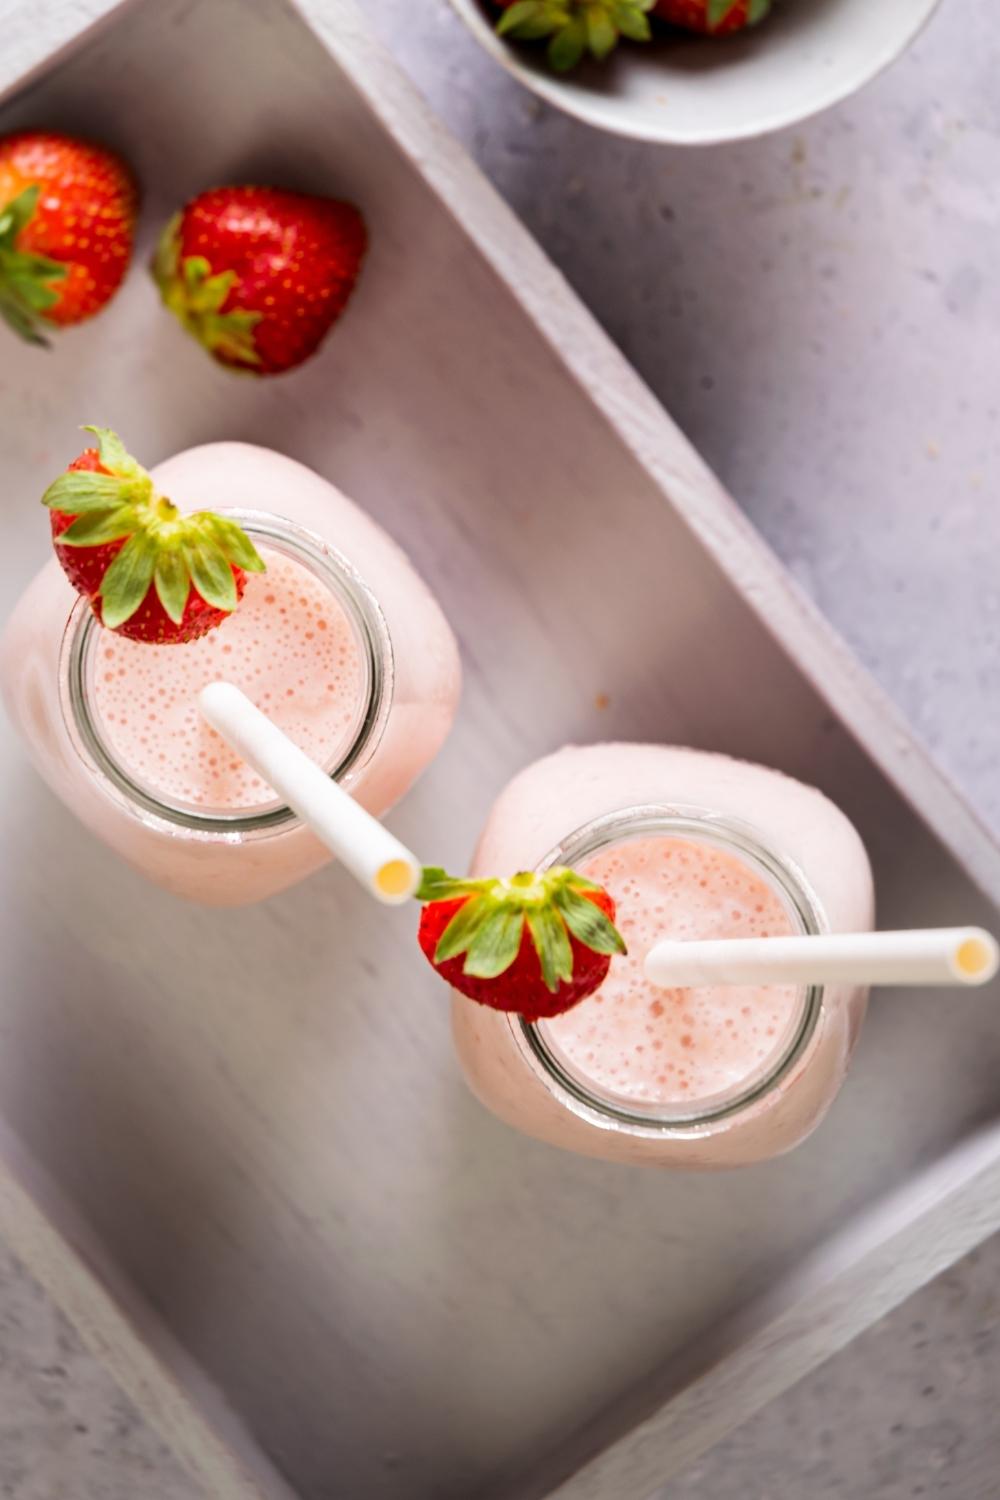 Two glassed with straws in them filled with strawberry banana smoothie.